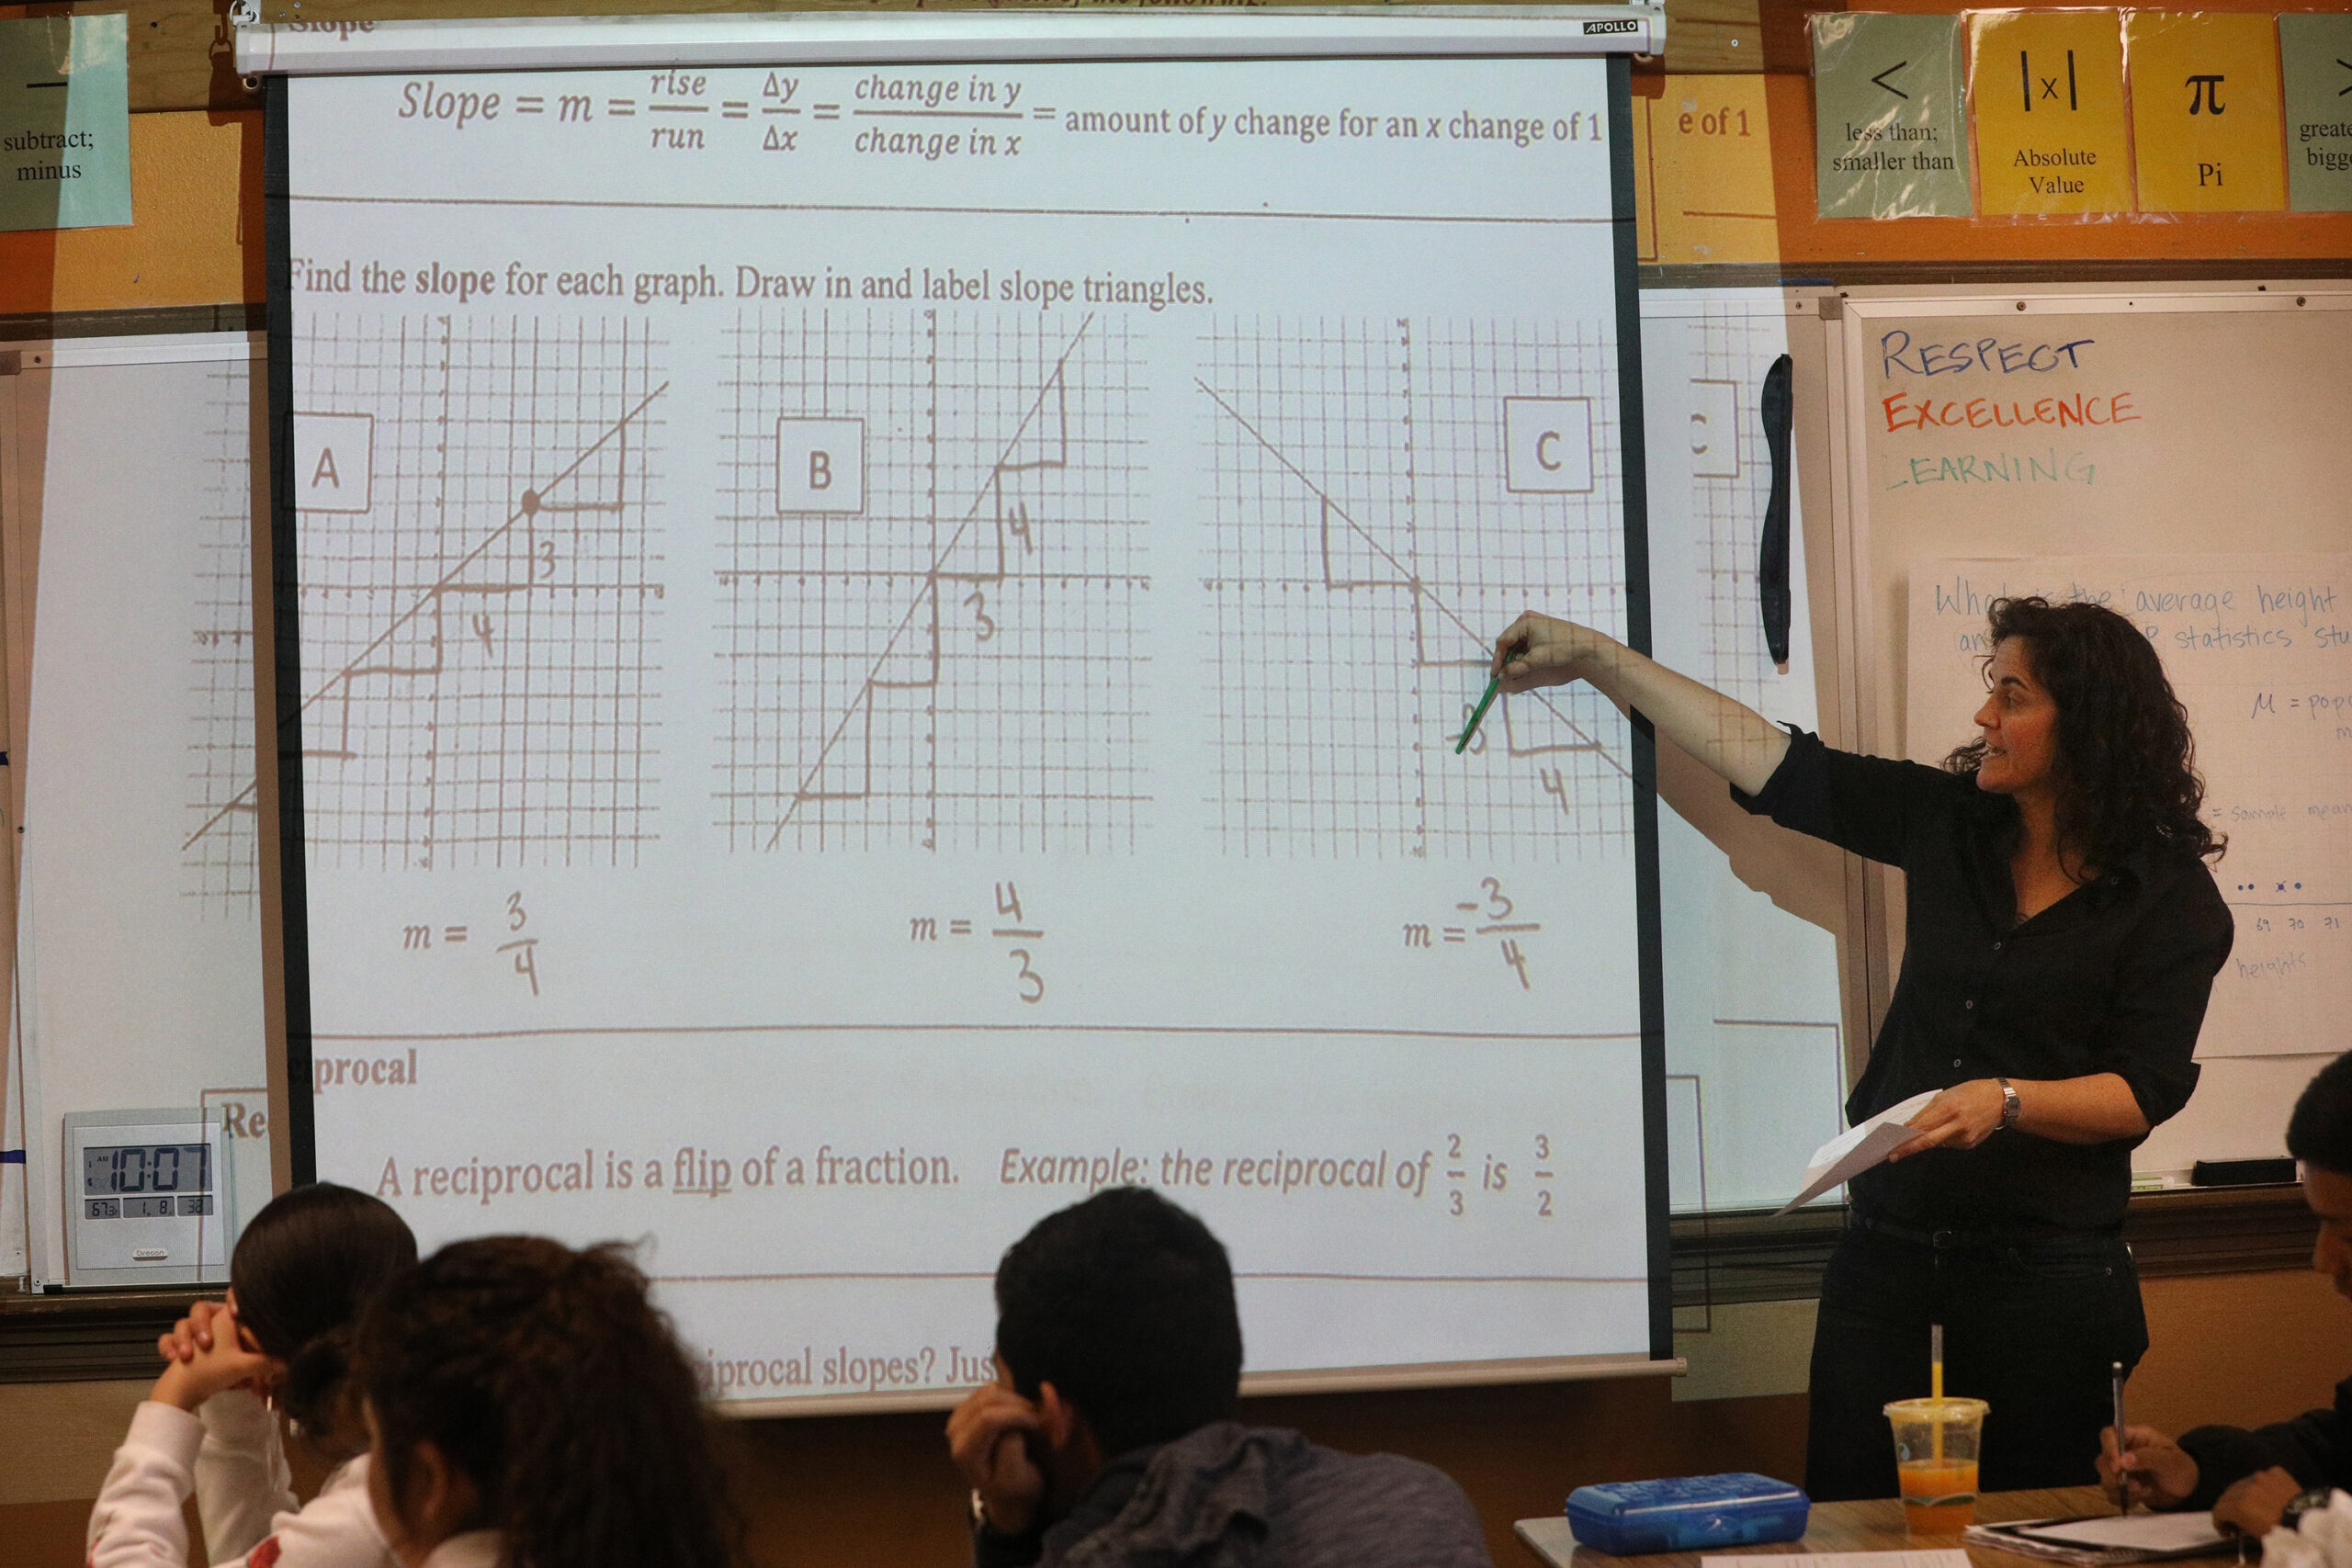 A teacher points to a projection of graphs on a screen, explaining slope, in front of students in a classroom.